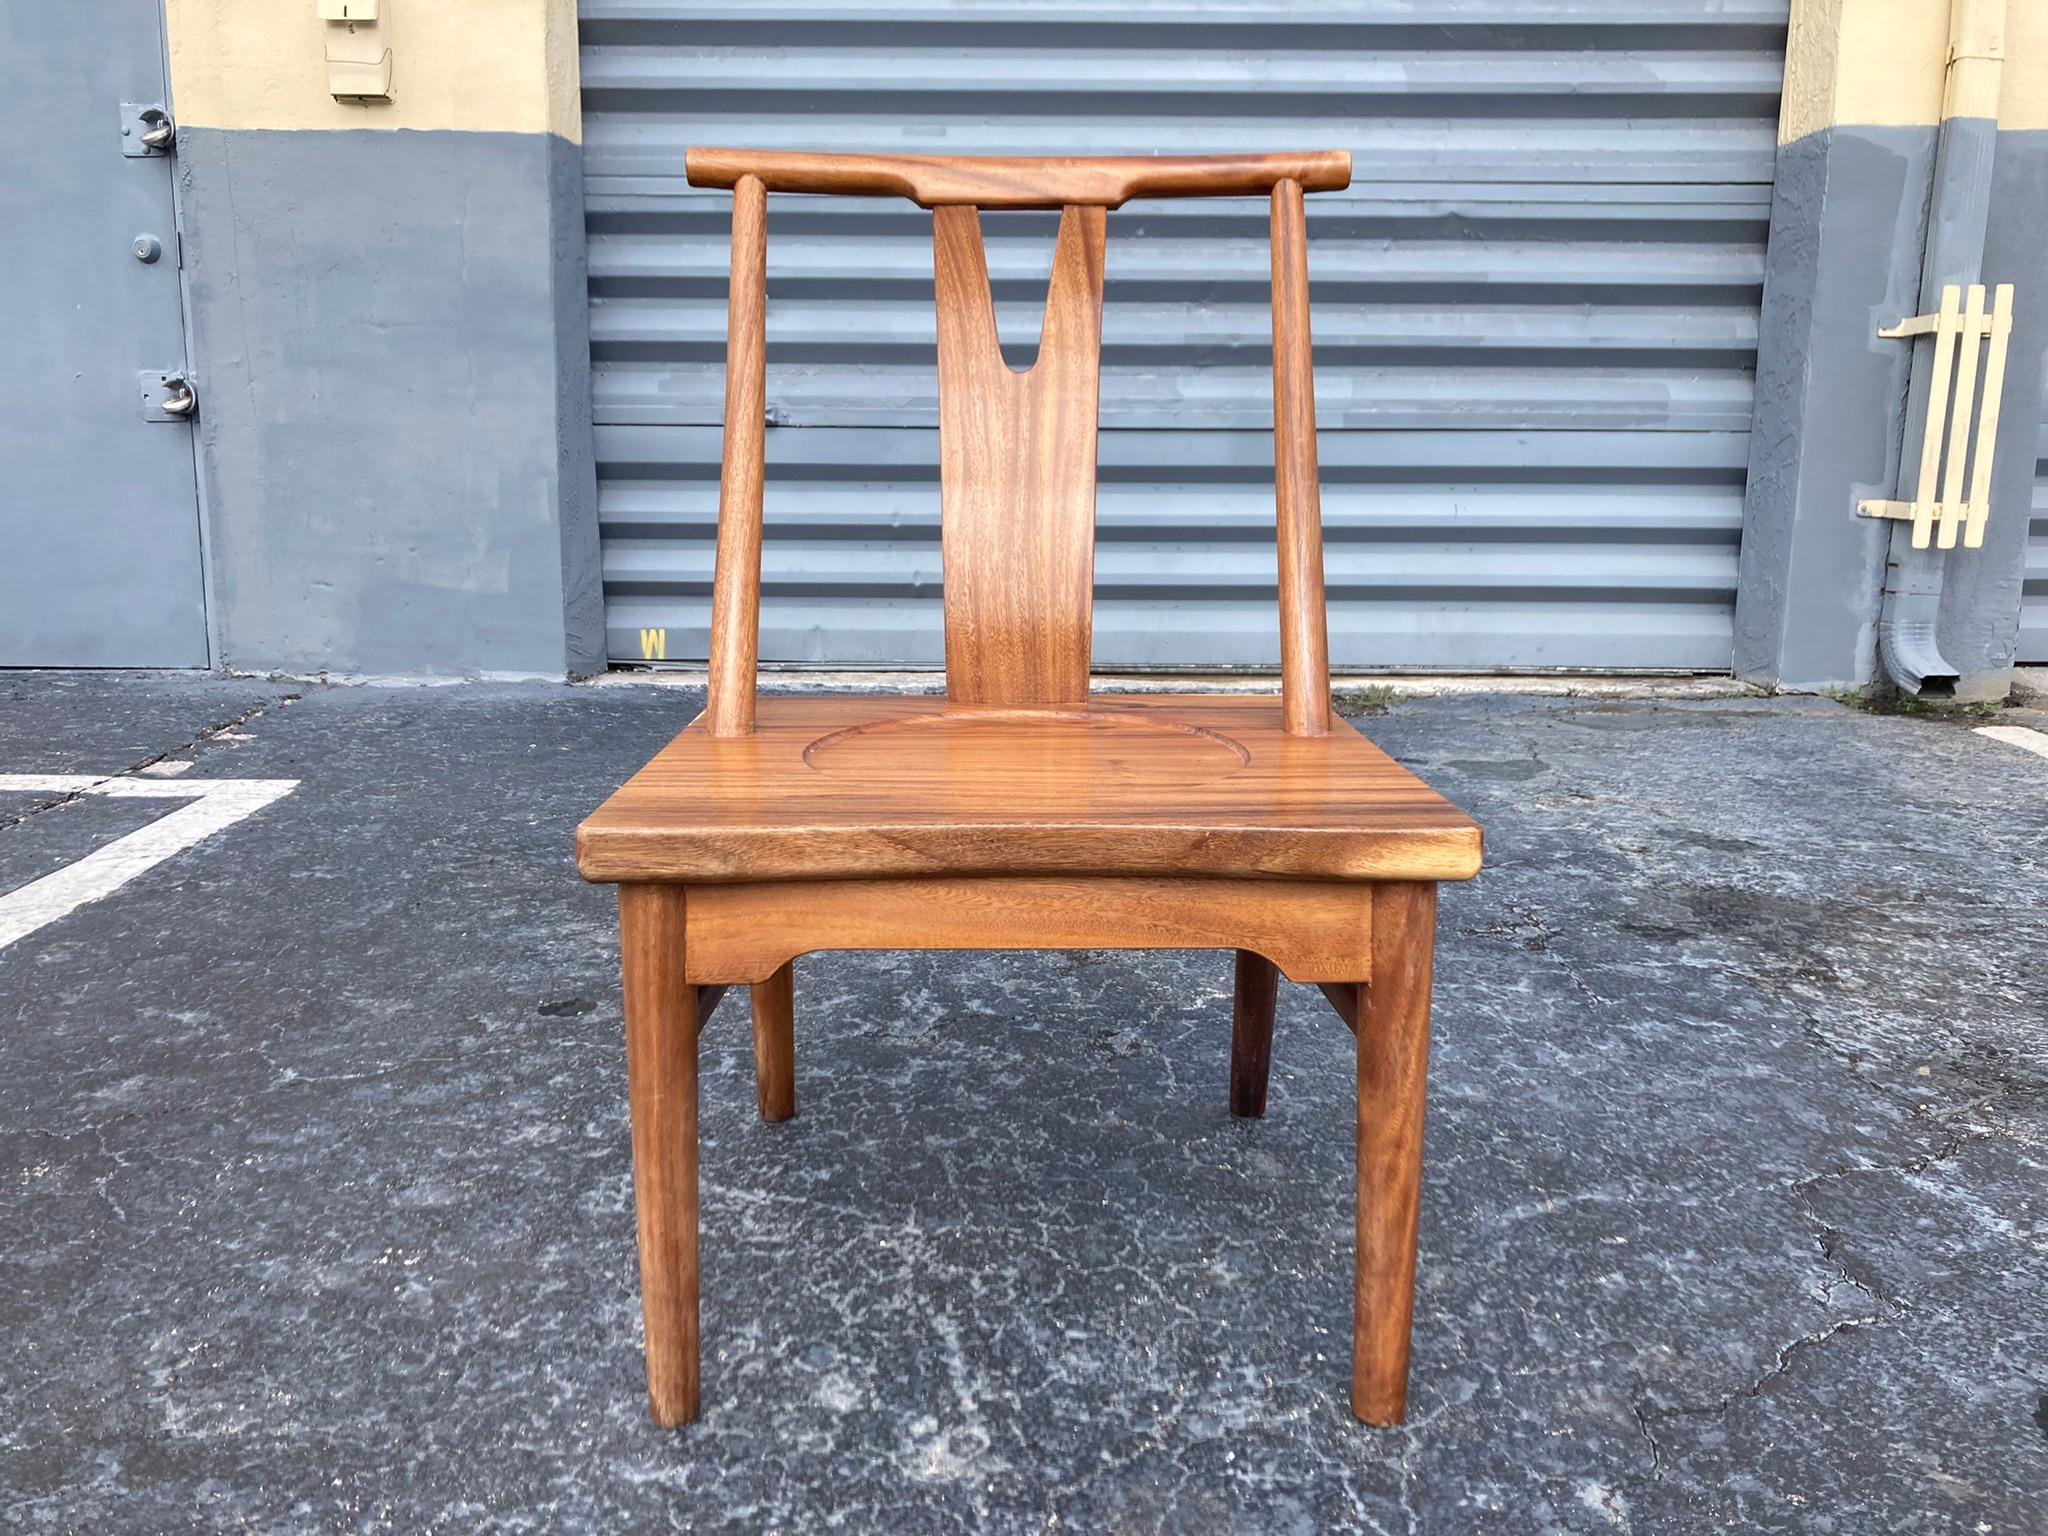 Great set of six dining chairs in the style of George Nakashima. Very well built. Ready for a new home.
Back has a width of 23.50” and seat 22.75”.